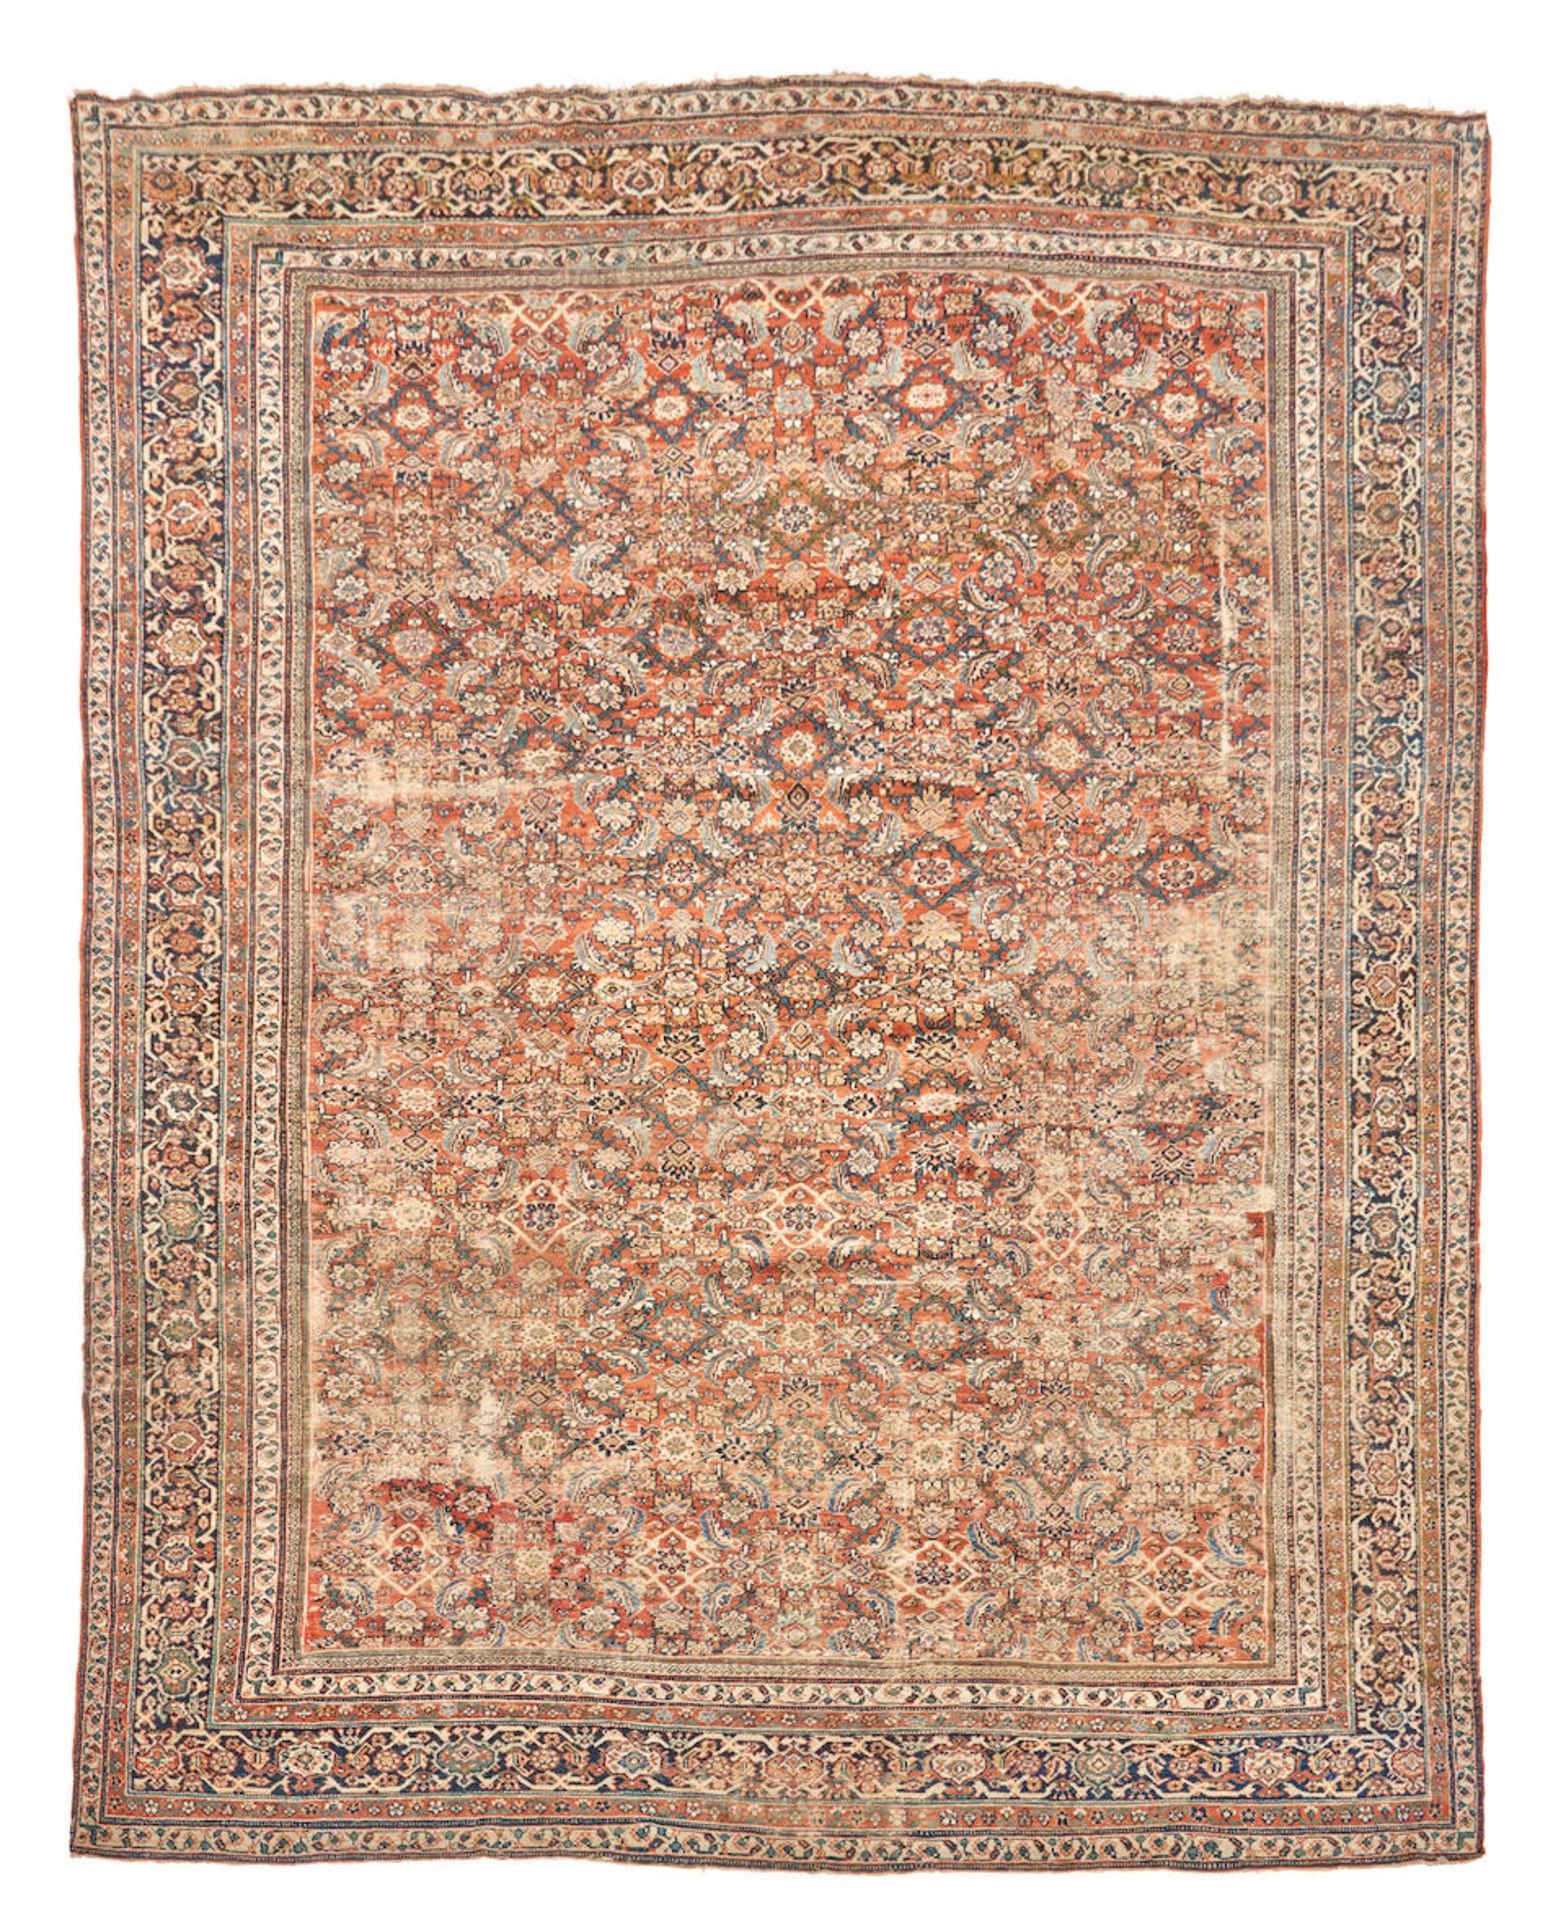 Sultanabad Carpet Iran 10 ft. 5 in. x 13 ft. 6 in.